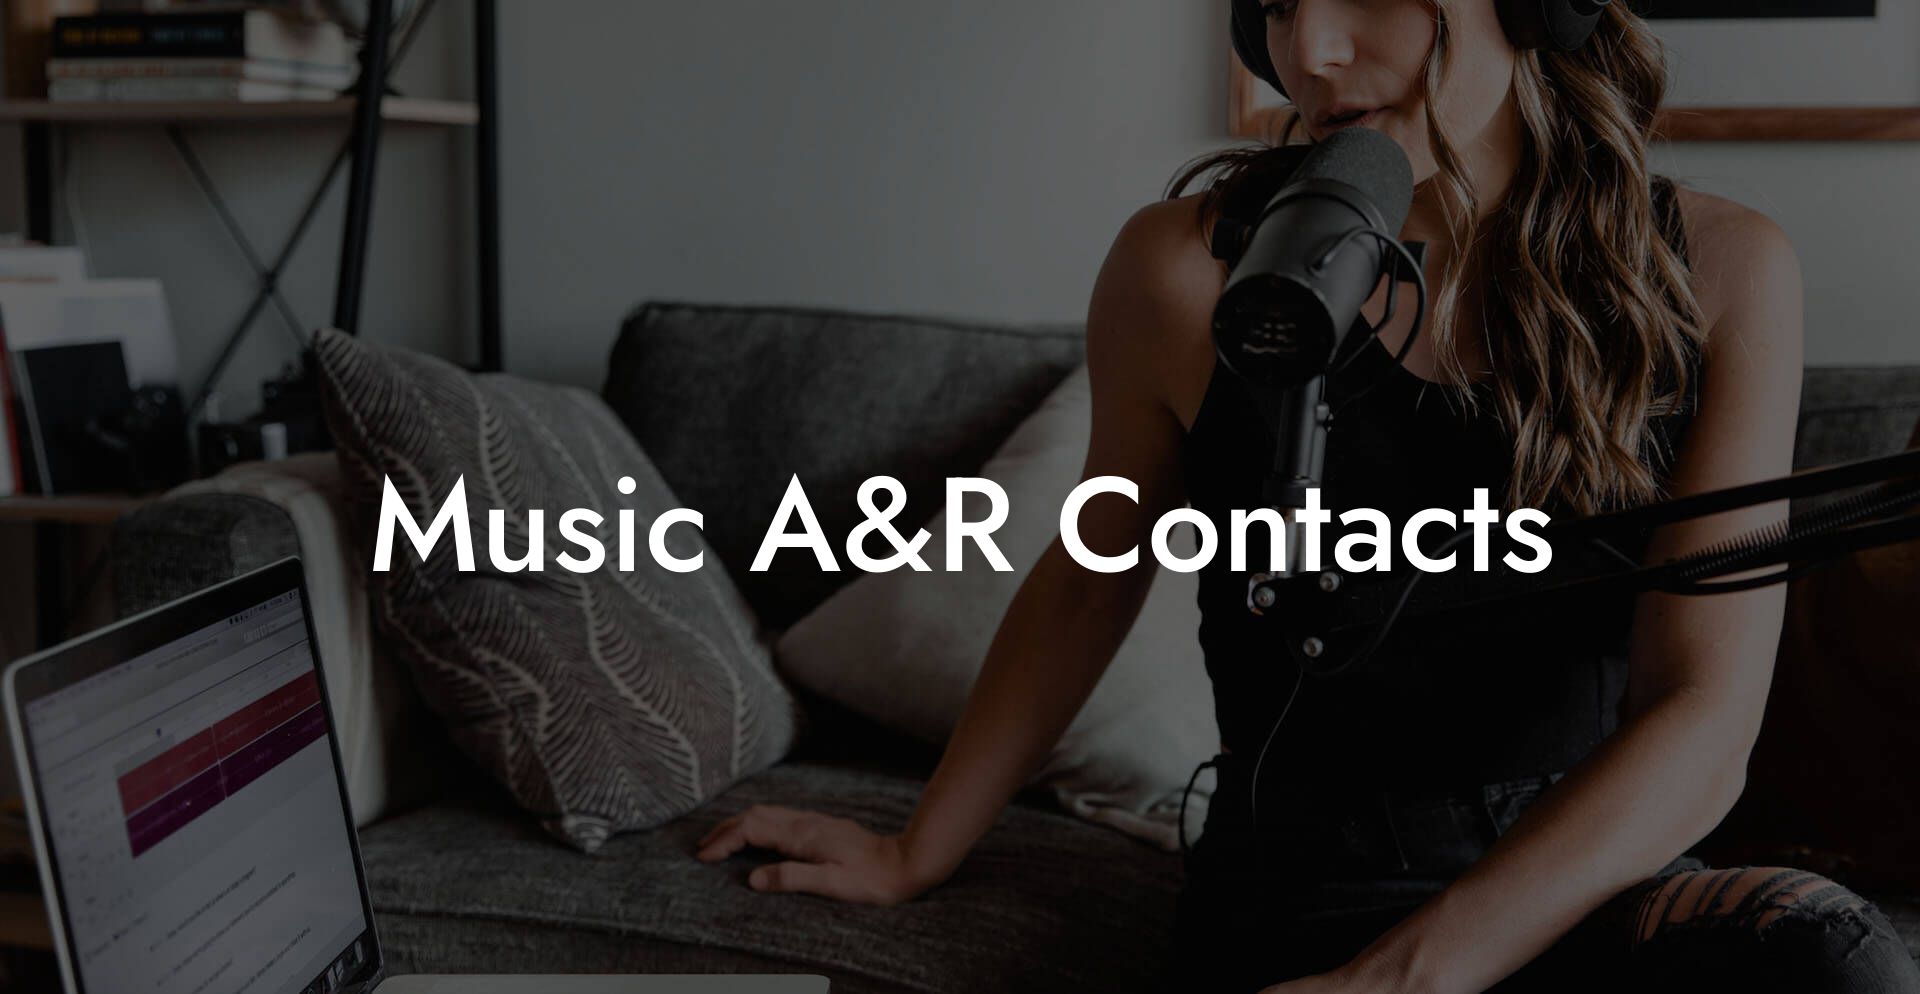 Music A&R Contacts